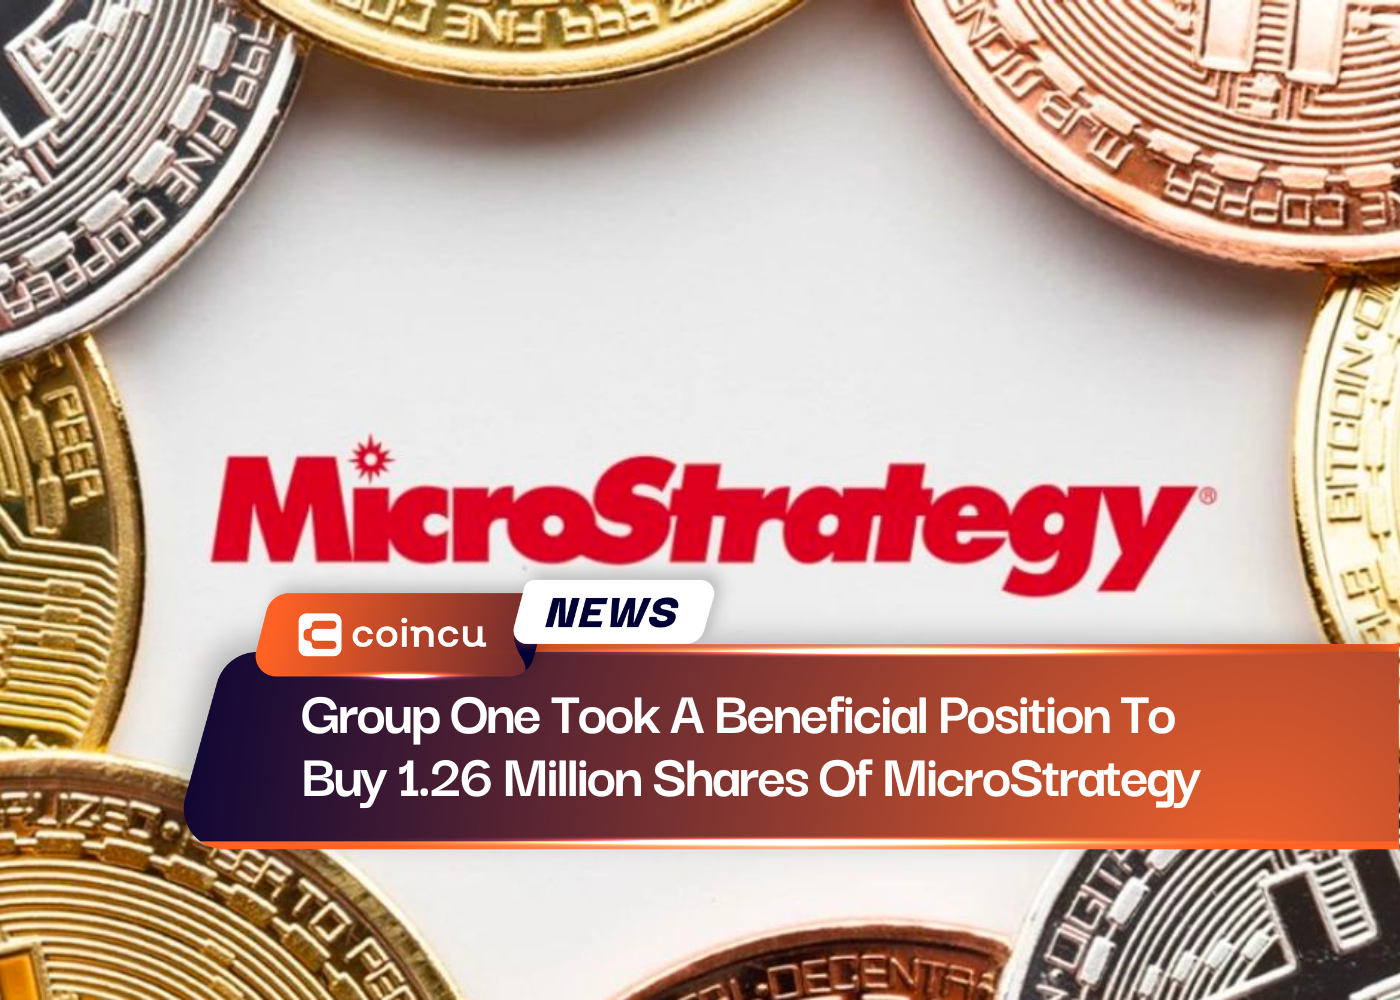 Group One Took A Beneficial Position To Buy 1.26 Million Shares Of MicroStrategy